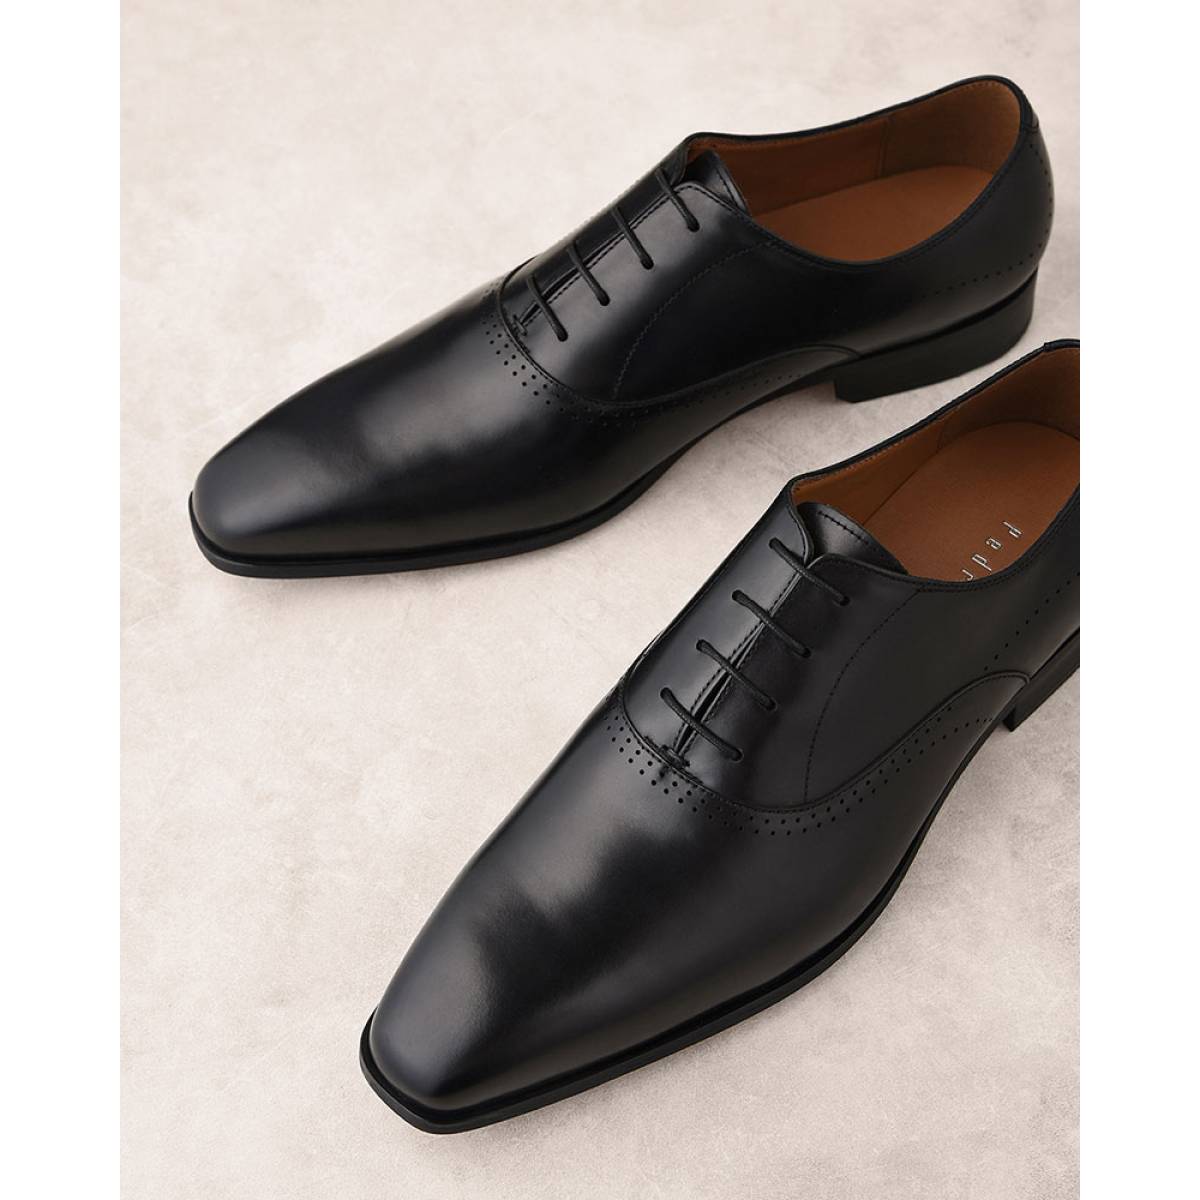 Buy Burnished Leather Oxford Shoes Online | La Rue Cambodia